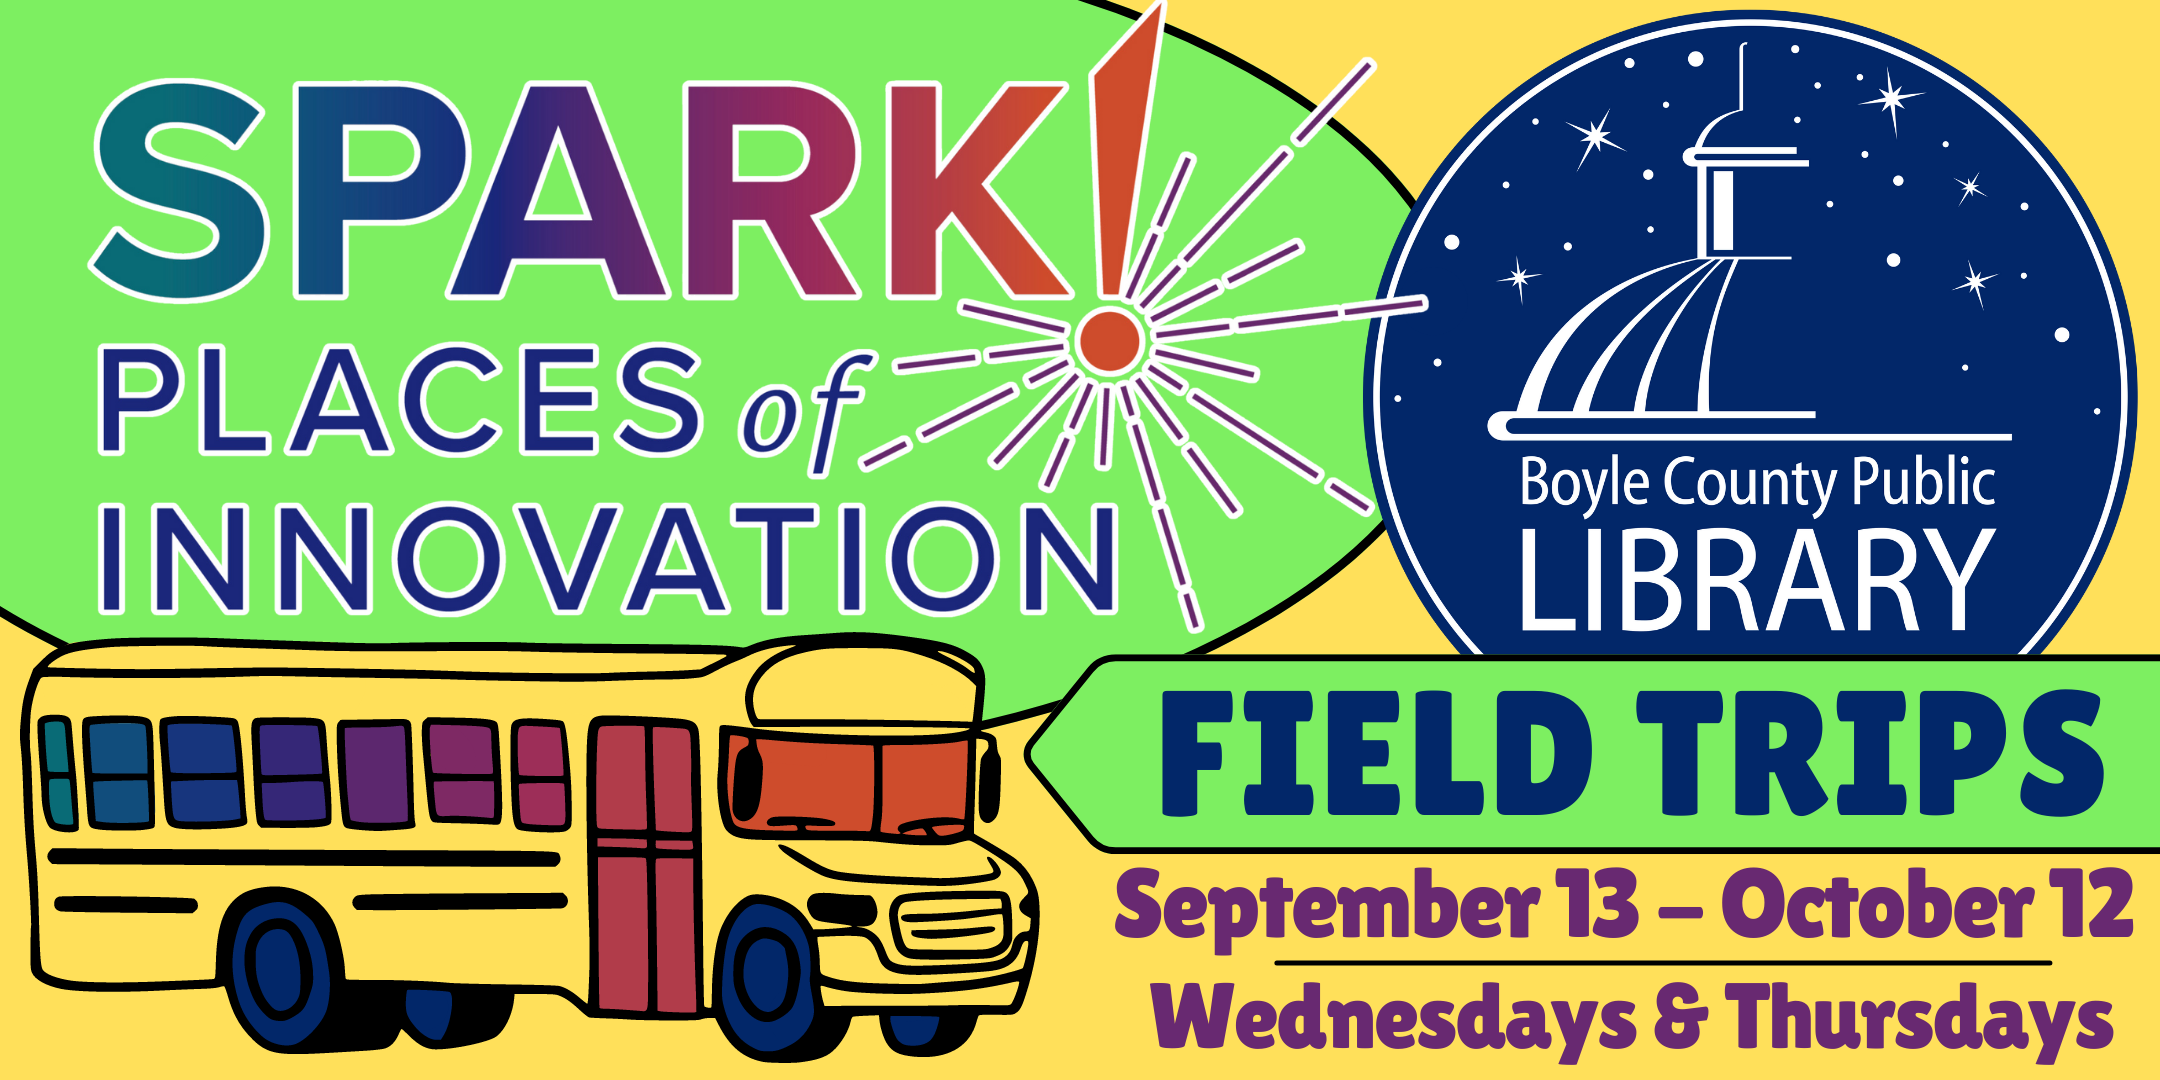 Spark! Place of Innovation - Field Trips @ The Boyle County Public Library: September 13th through October 12th on Wednesdays and Thursdays